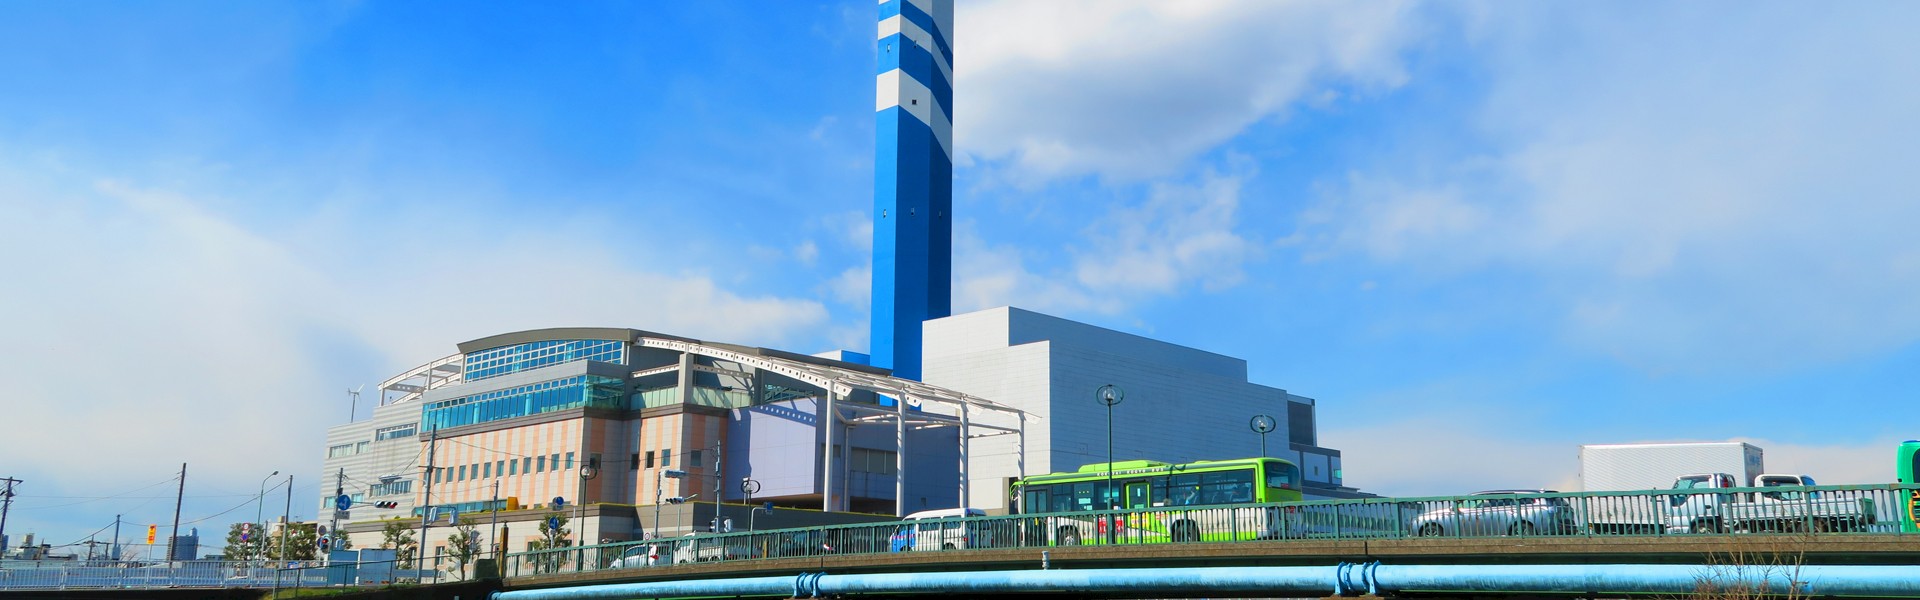 We use gasification to convert municipal solid wastes into clean electricity, liquid fuels & CO2e credits.